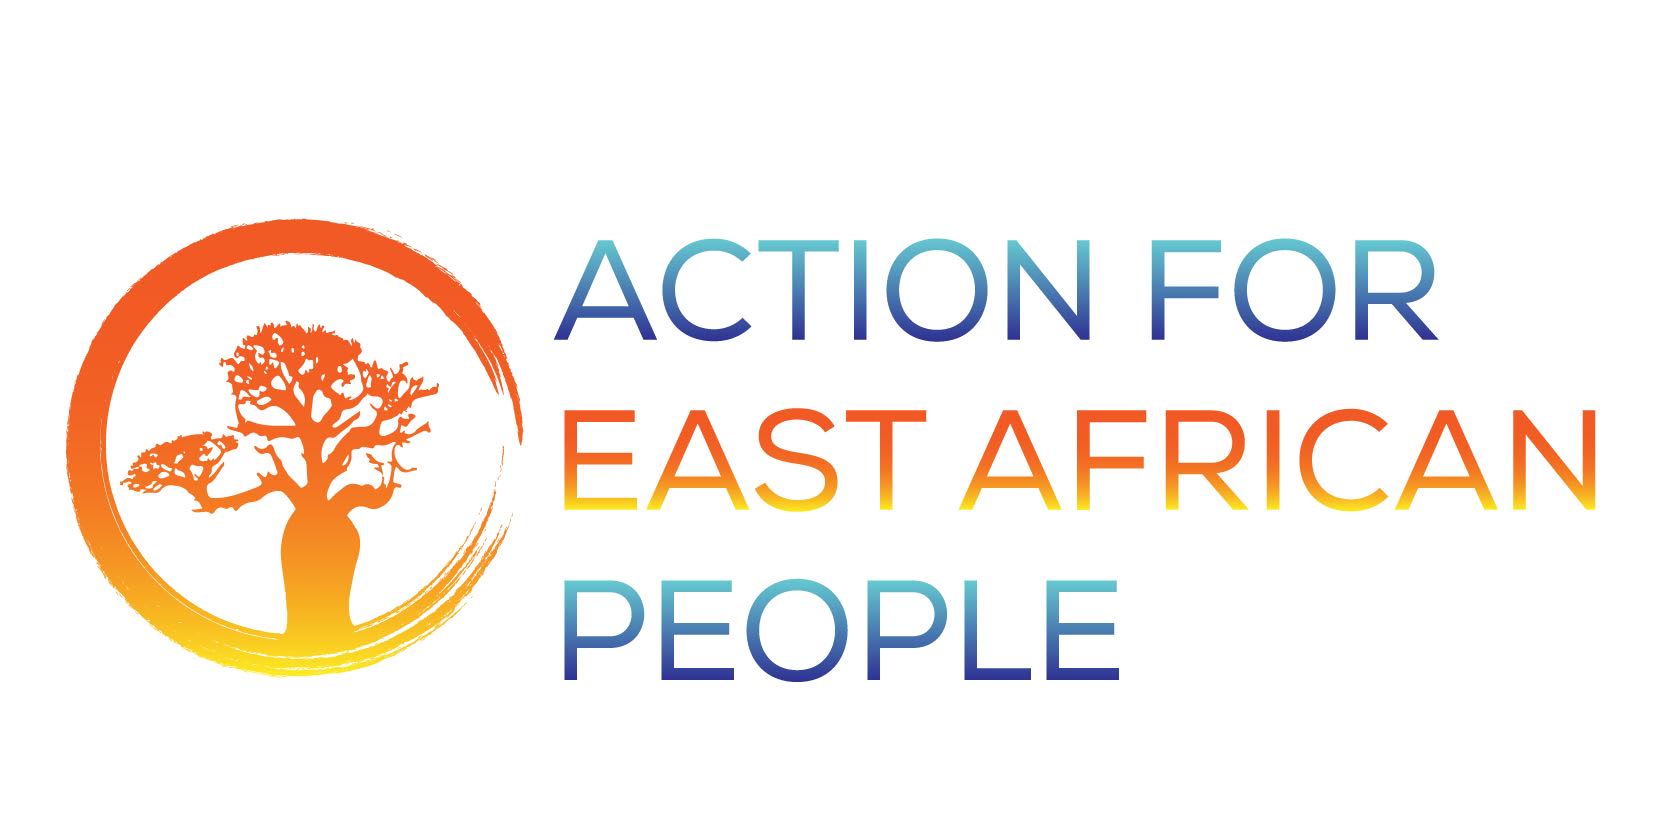 Action For East African People logo